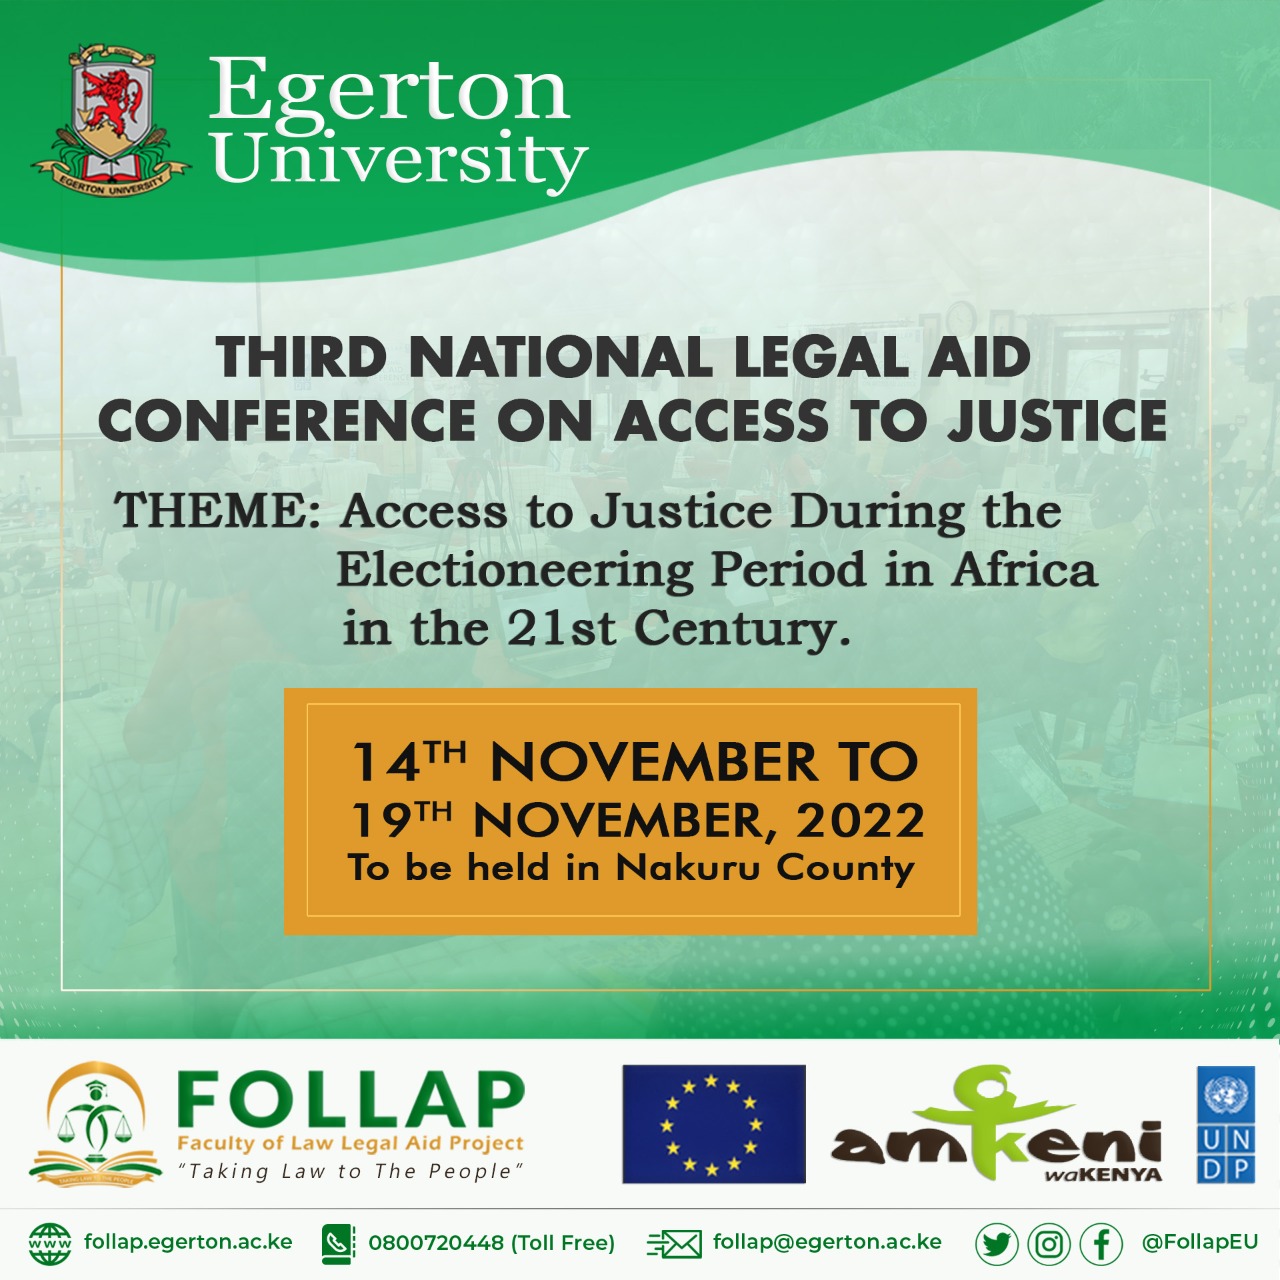 Call For Abstracts, Papers, Posters, And Exhibits: Third National Legal Aid Conference on Access to Justice